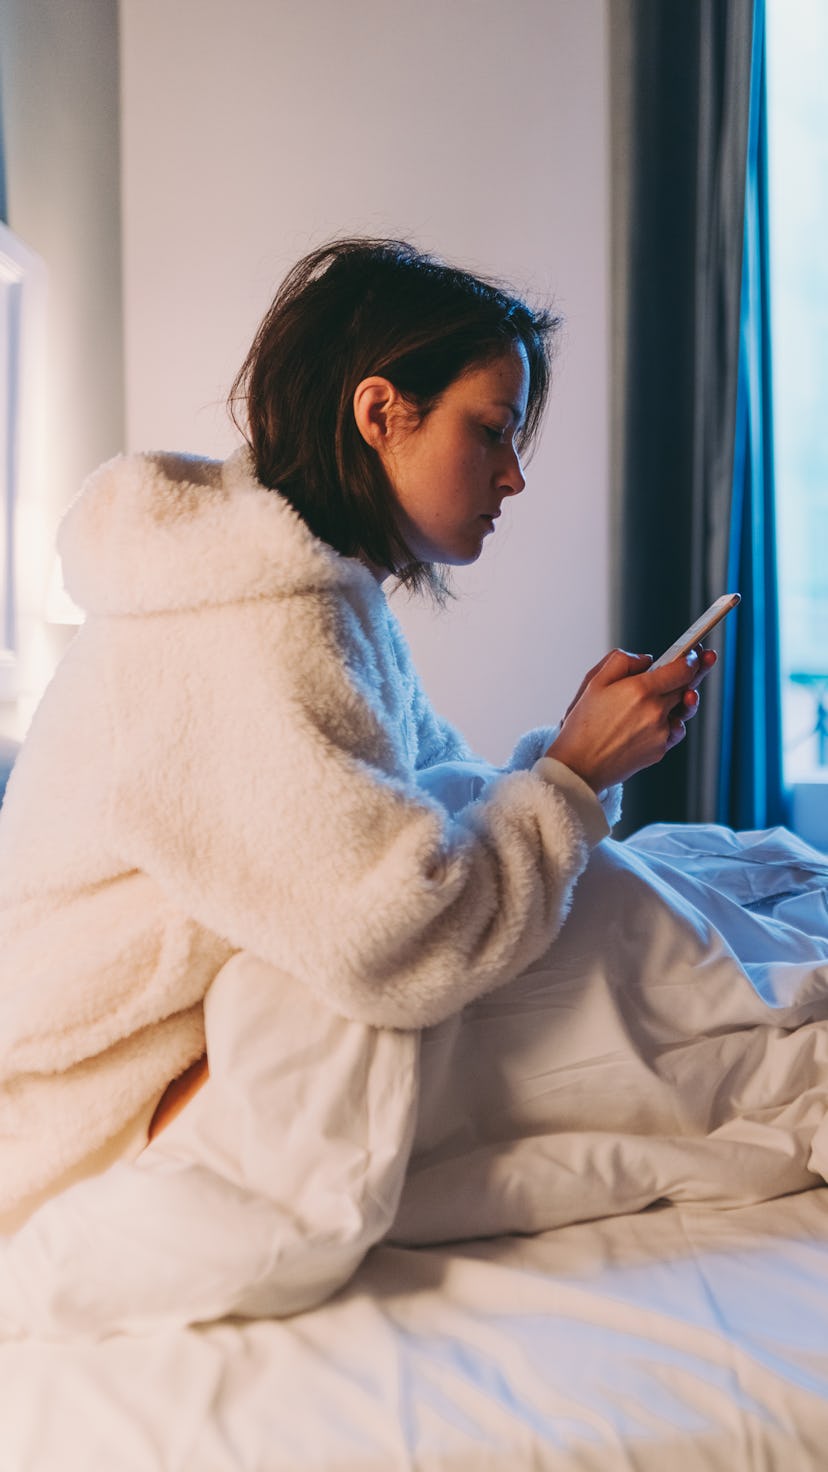 A woman checks her phone while in bed with COVID.